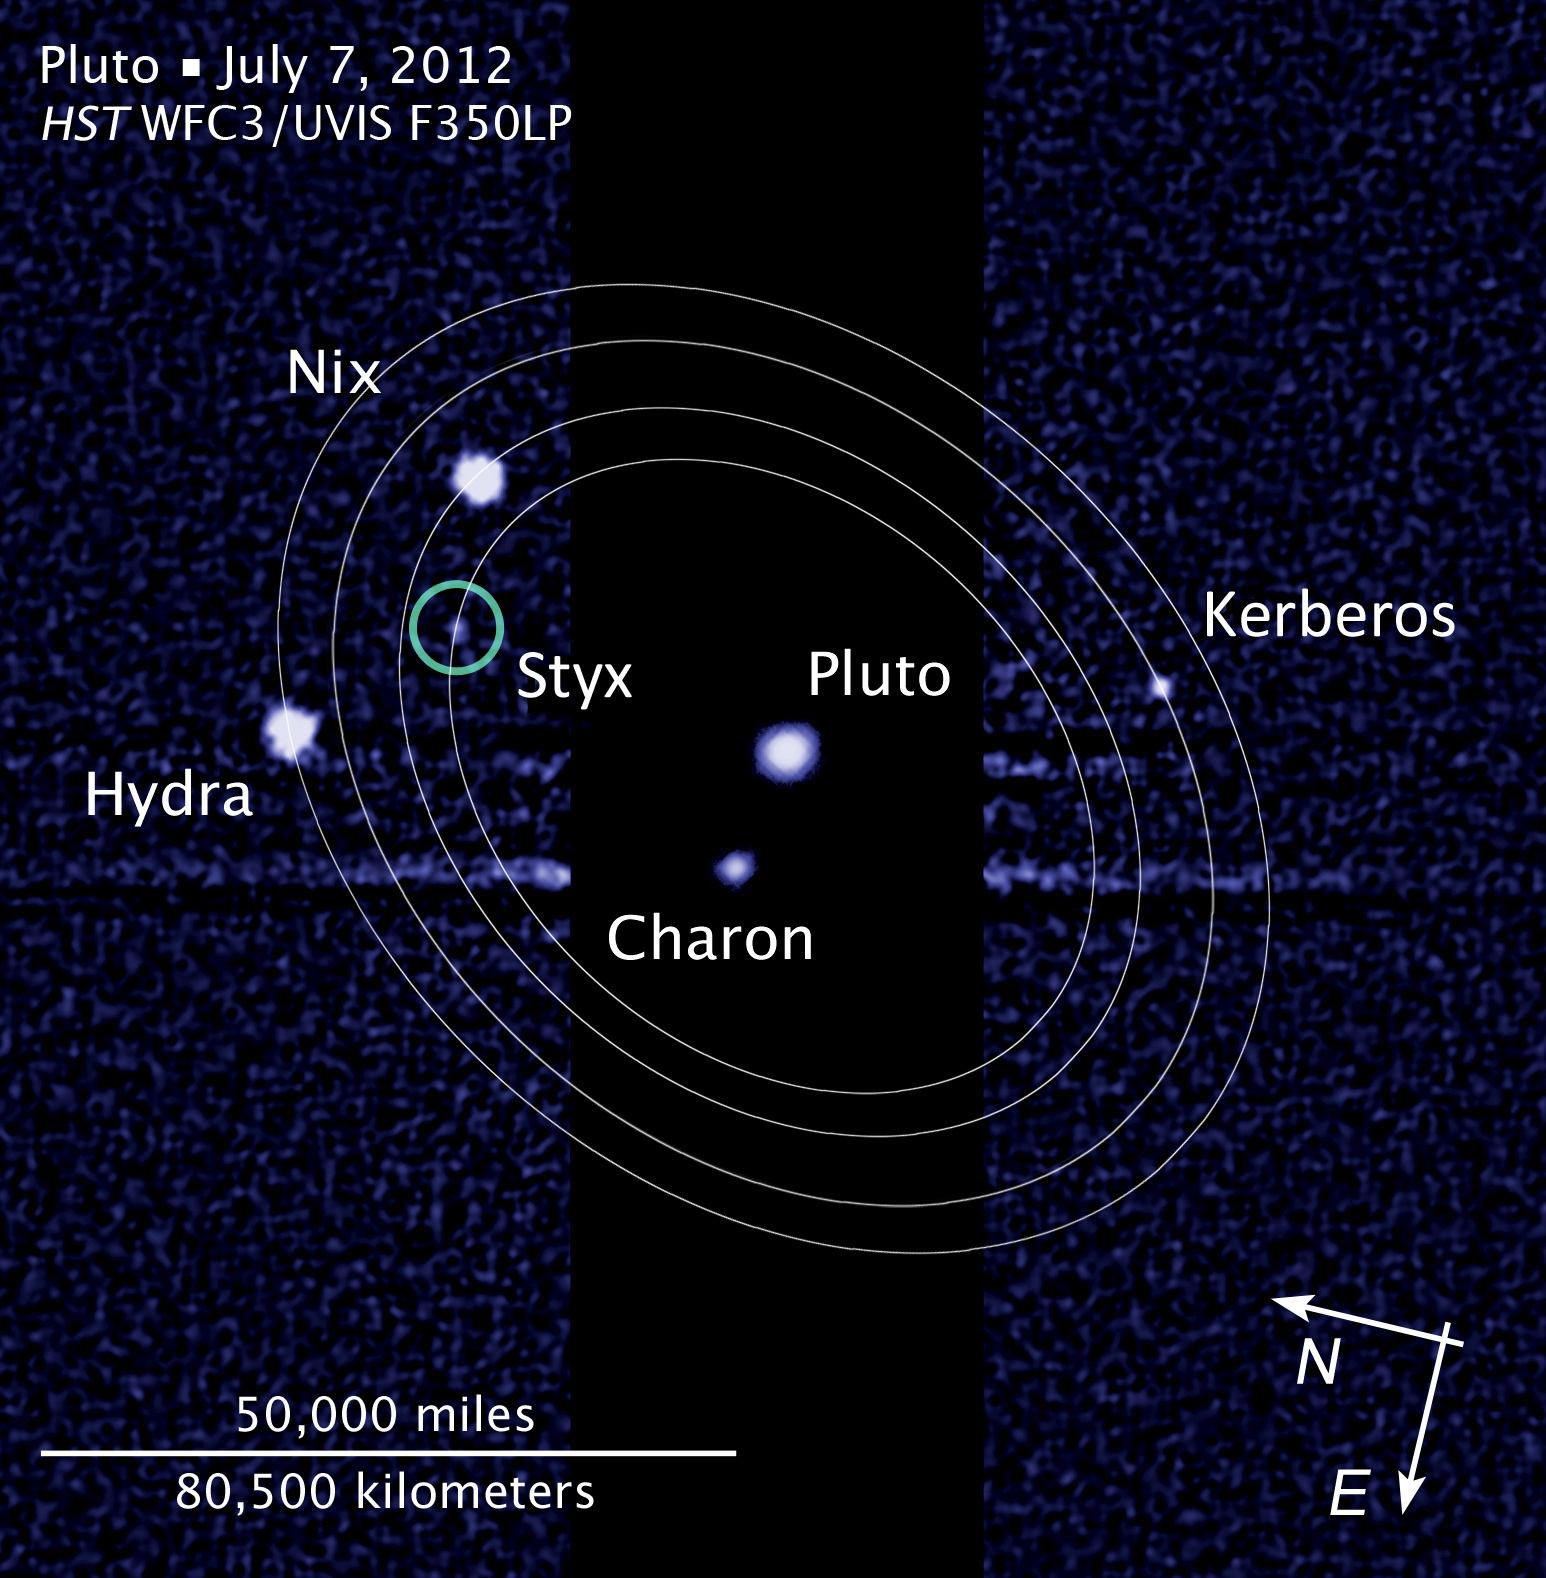 HST image of Pluto, Charon, and the four smaller satellites with illustrative orbits around the binary planet